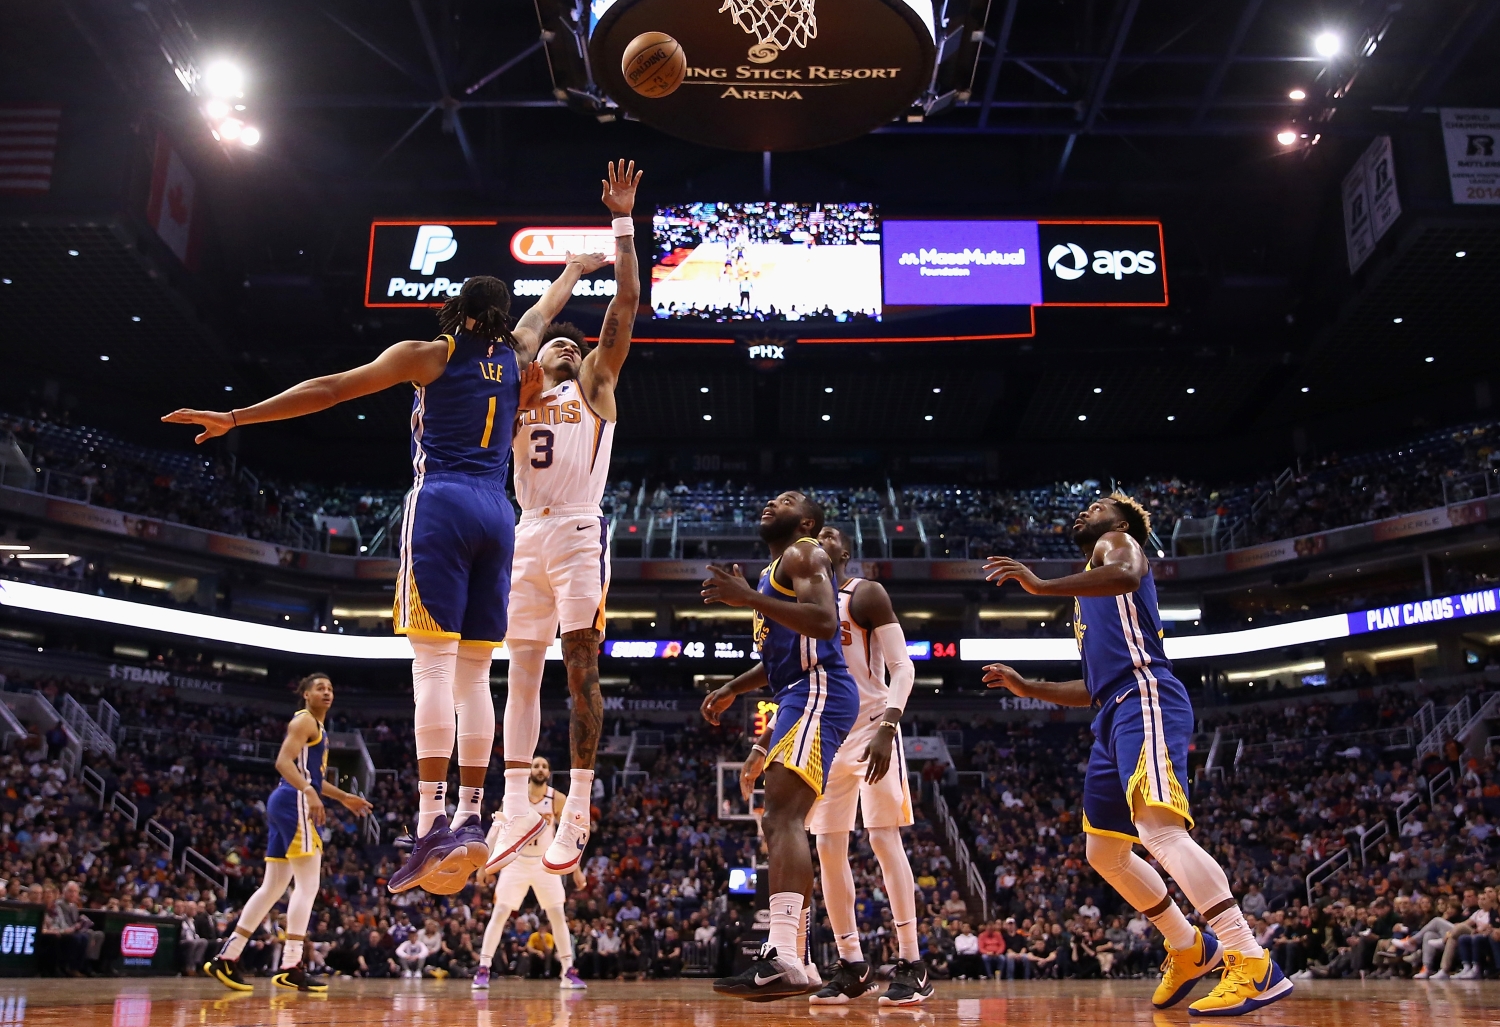 The Warriors will have to pay about $82 million in total to acquire Kelly Oubre Jr. from the Phoenix Suns due to the luxury tax implications of adding his $14 million salary.